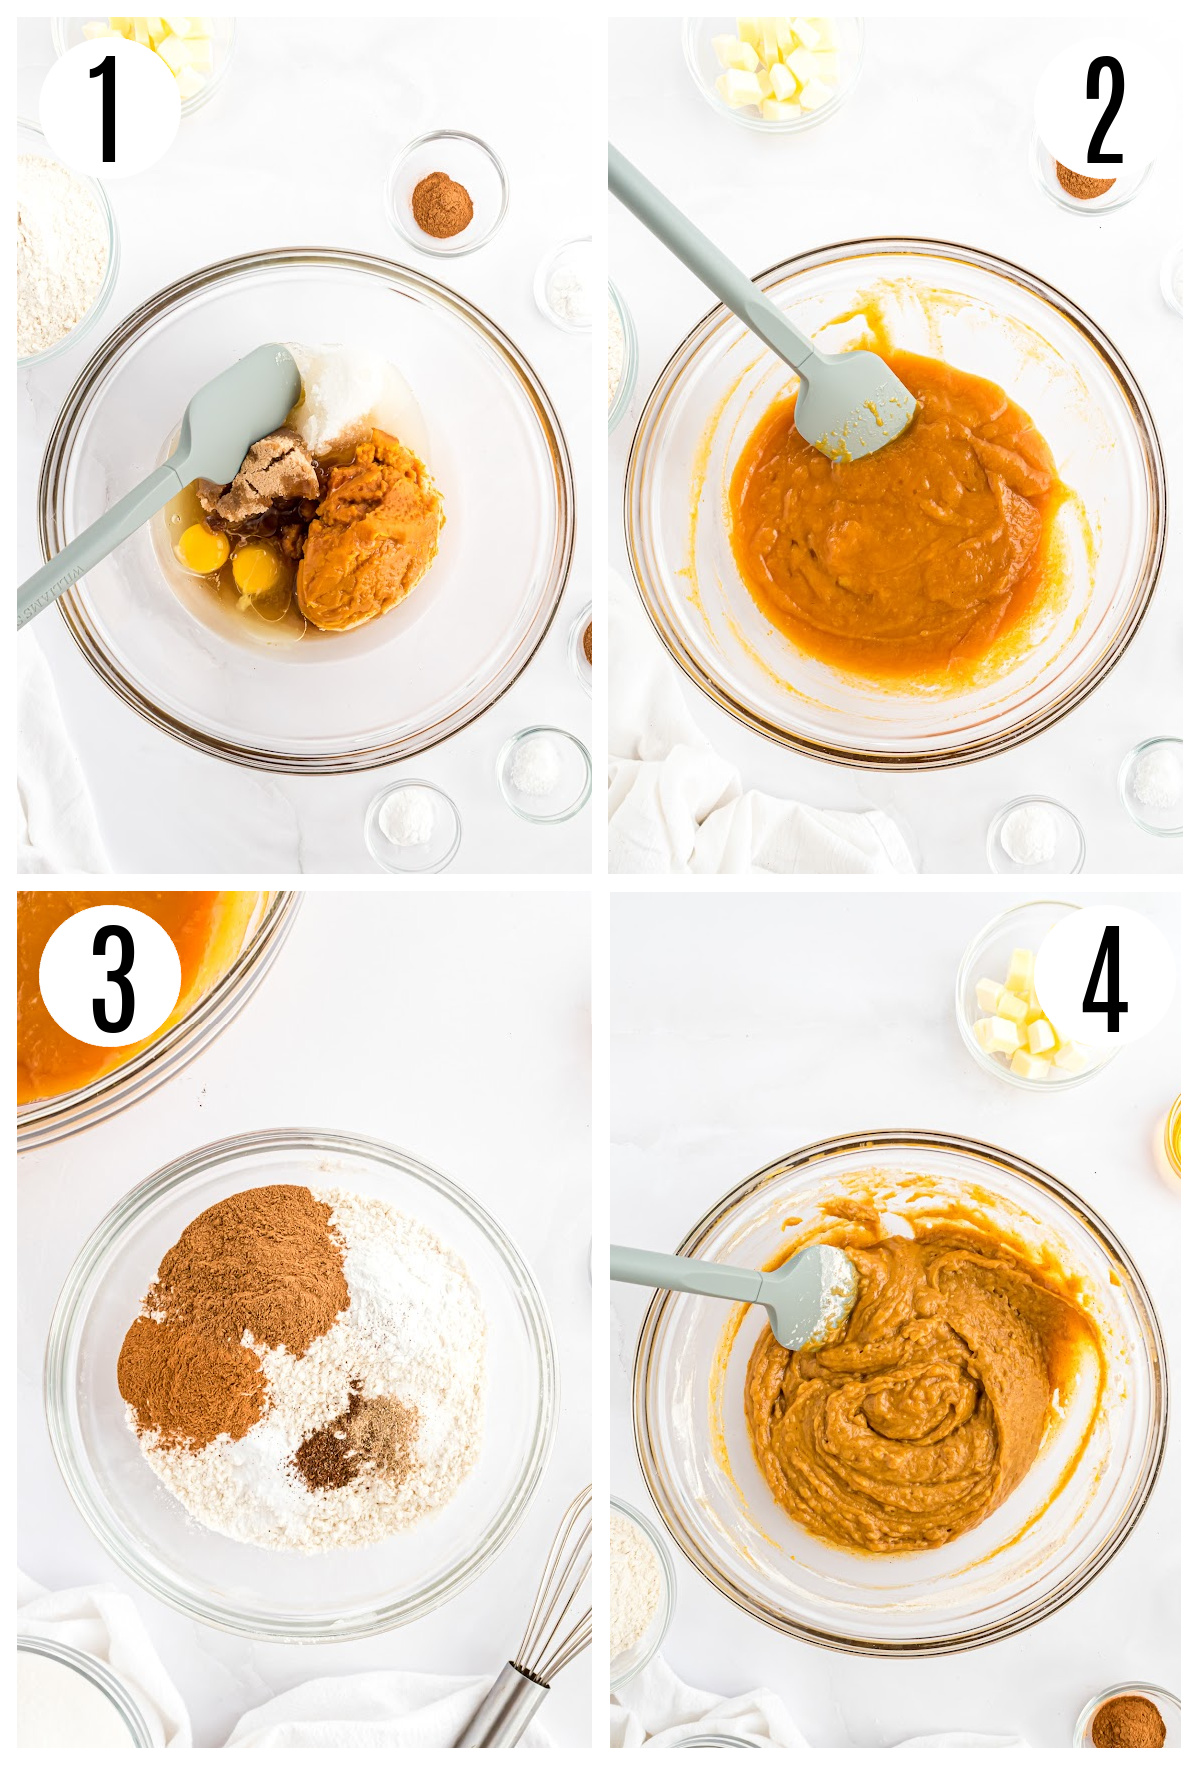 A group of 4 photos showing the steps to make the Panera Bread Pumpkin muffin recipe, including mixing all the wet ingredients in a mixing bowl, adding the dry ingredients and stirring them together.